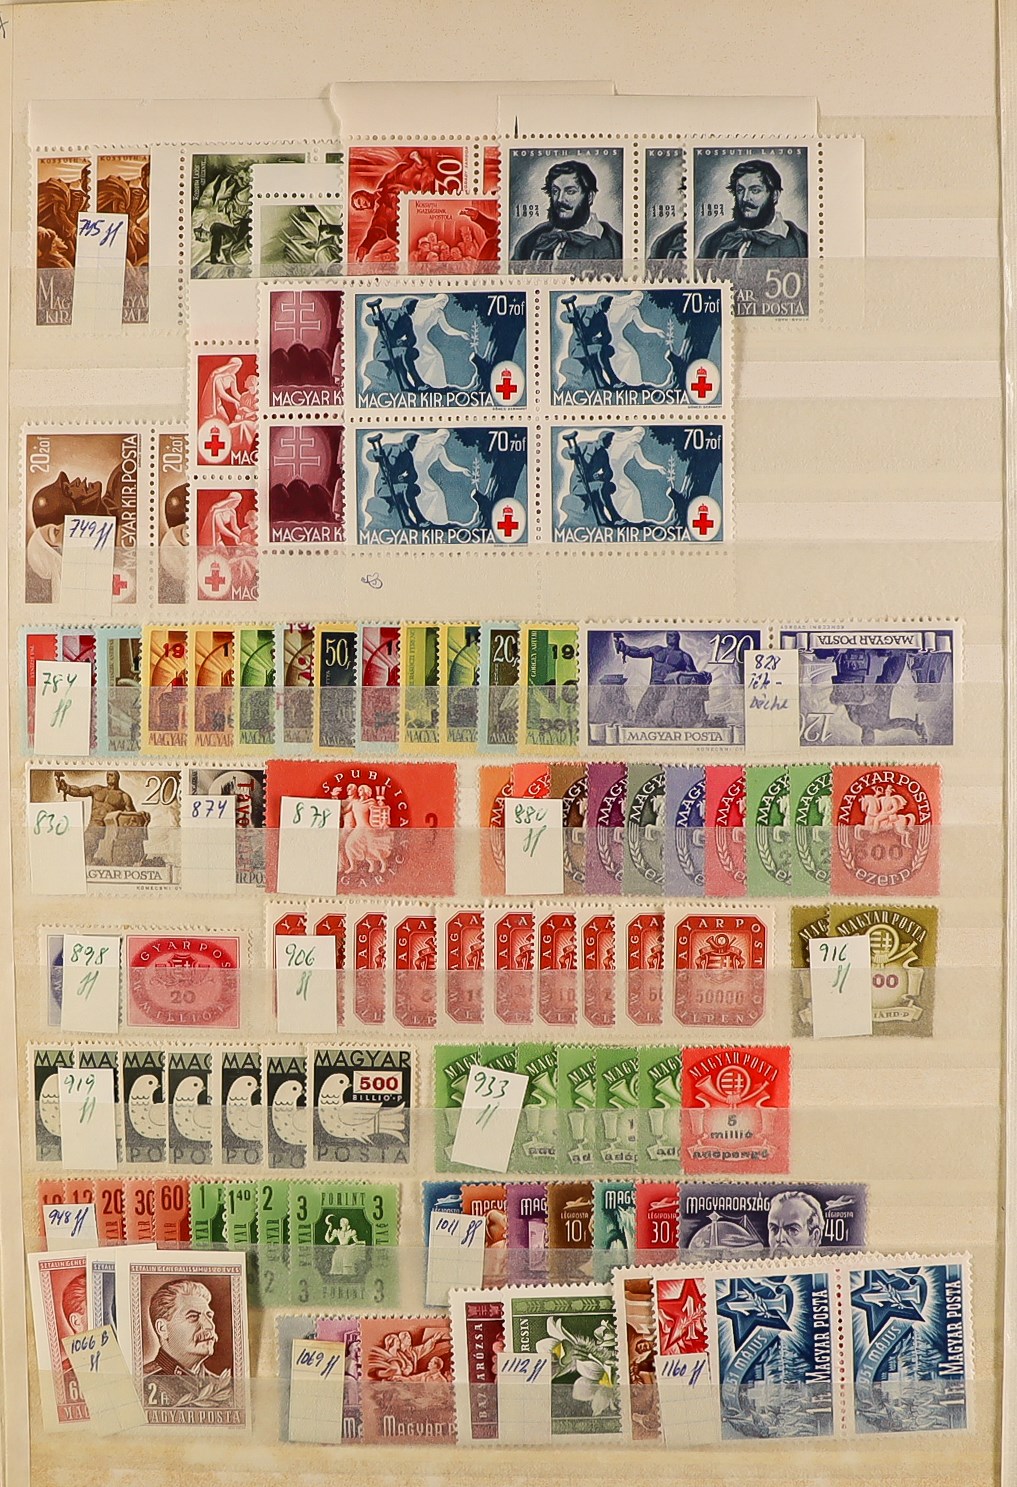 COLLECTIONS & ACCUMULATIONS WORLD WIDE MINT / NEVER HINGED MINT STAMPS in stock books, packets, - Image 13 of 17